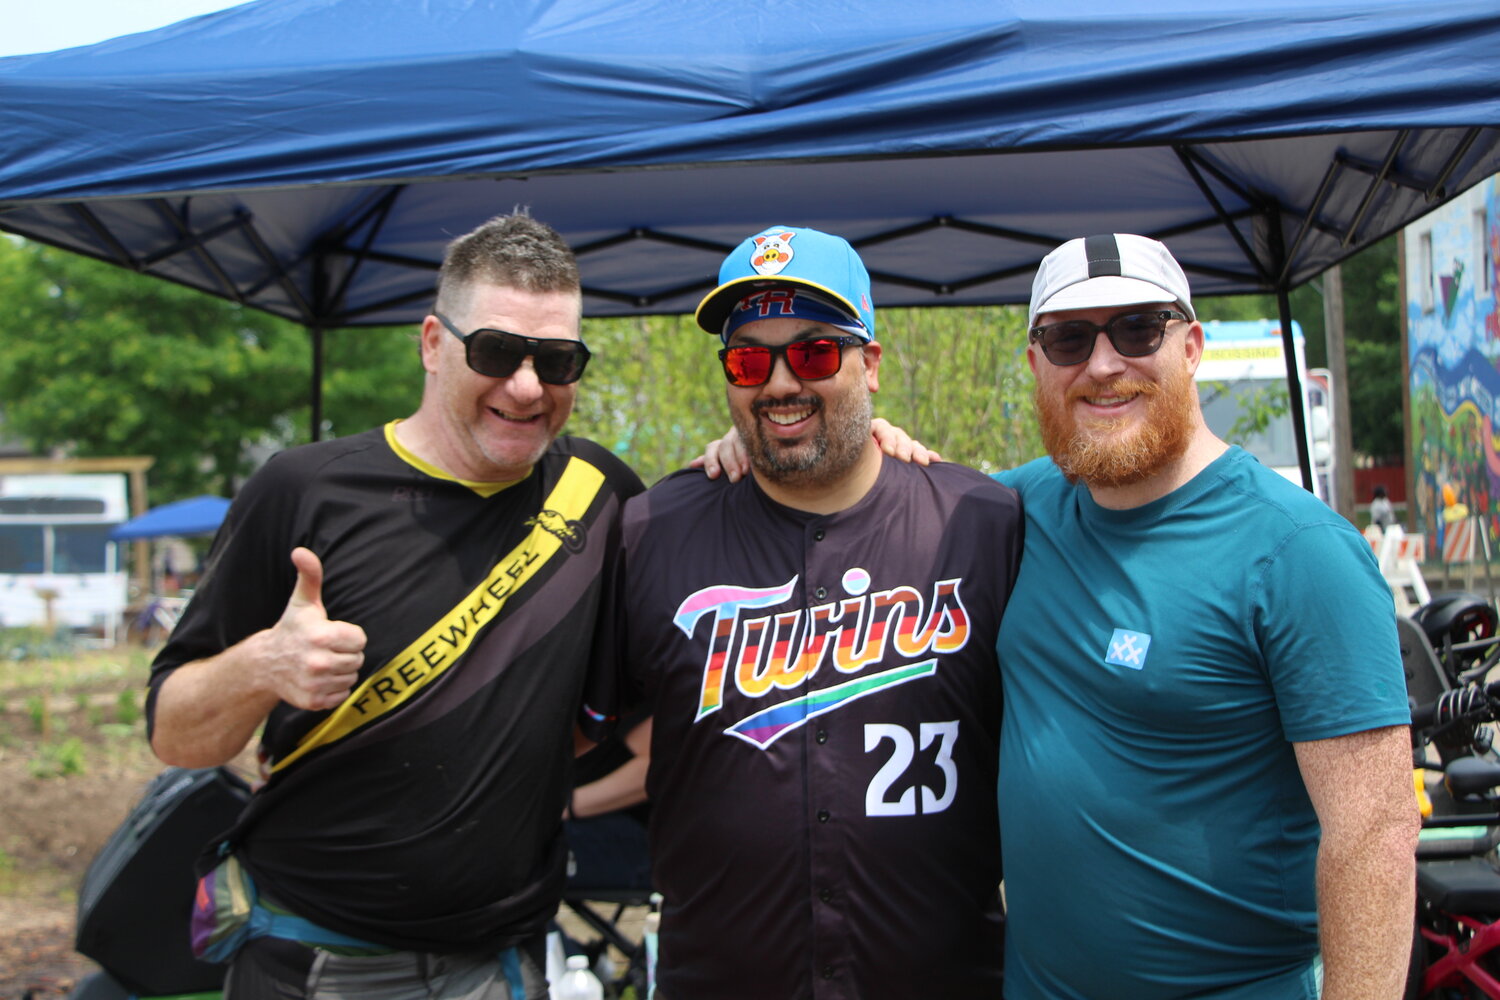 Partick Stephenson, Eric Moran and Mario Macaruso smile for a photo during the Joyful Riders Club DJ dance party at the Frogtown Fair on Saturday, June 17.